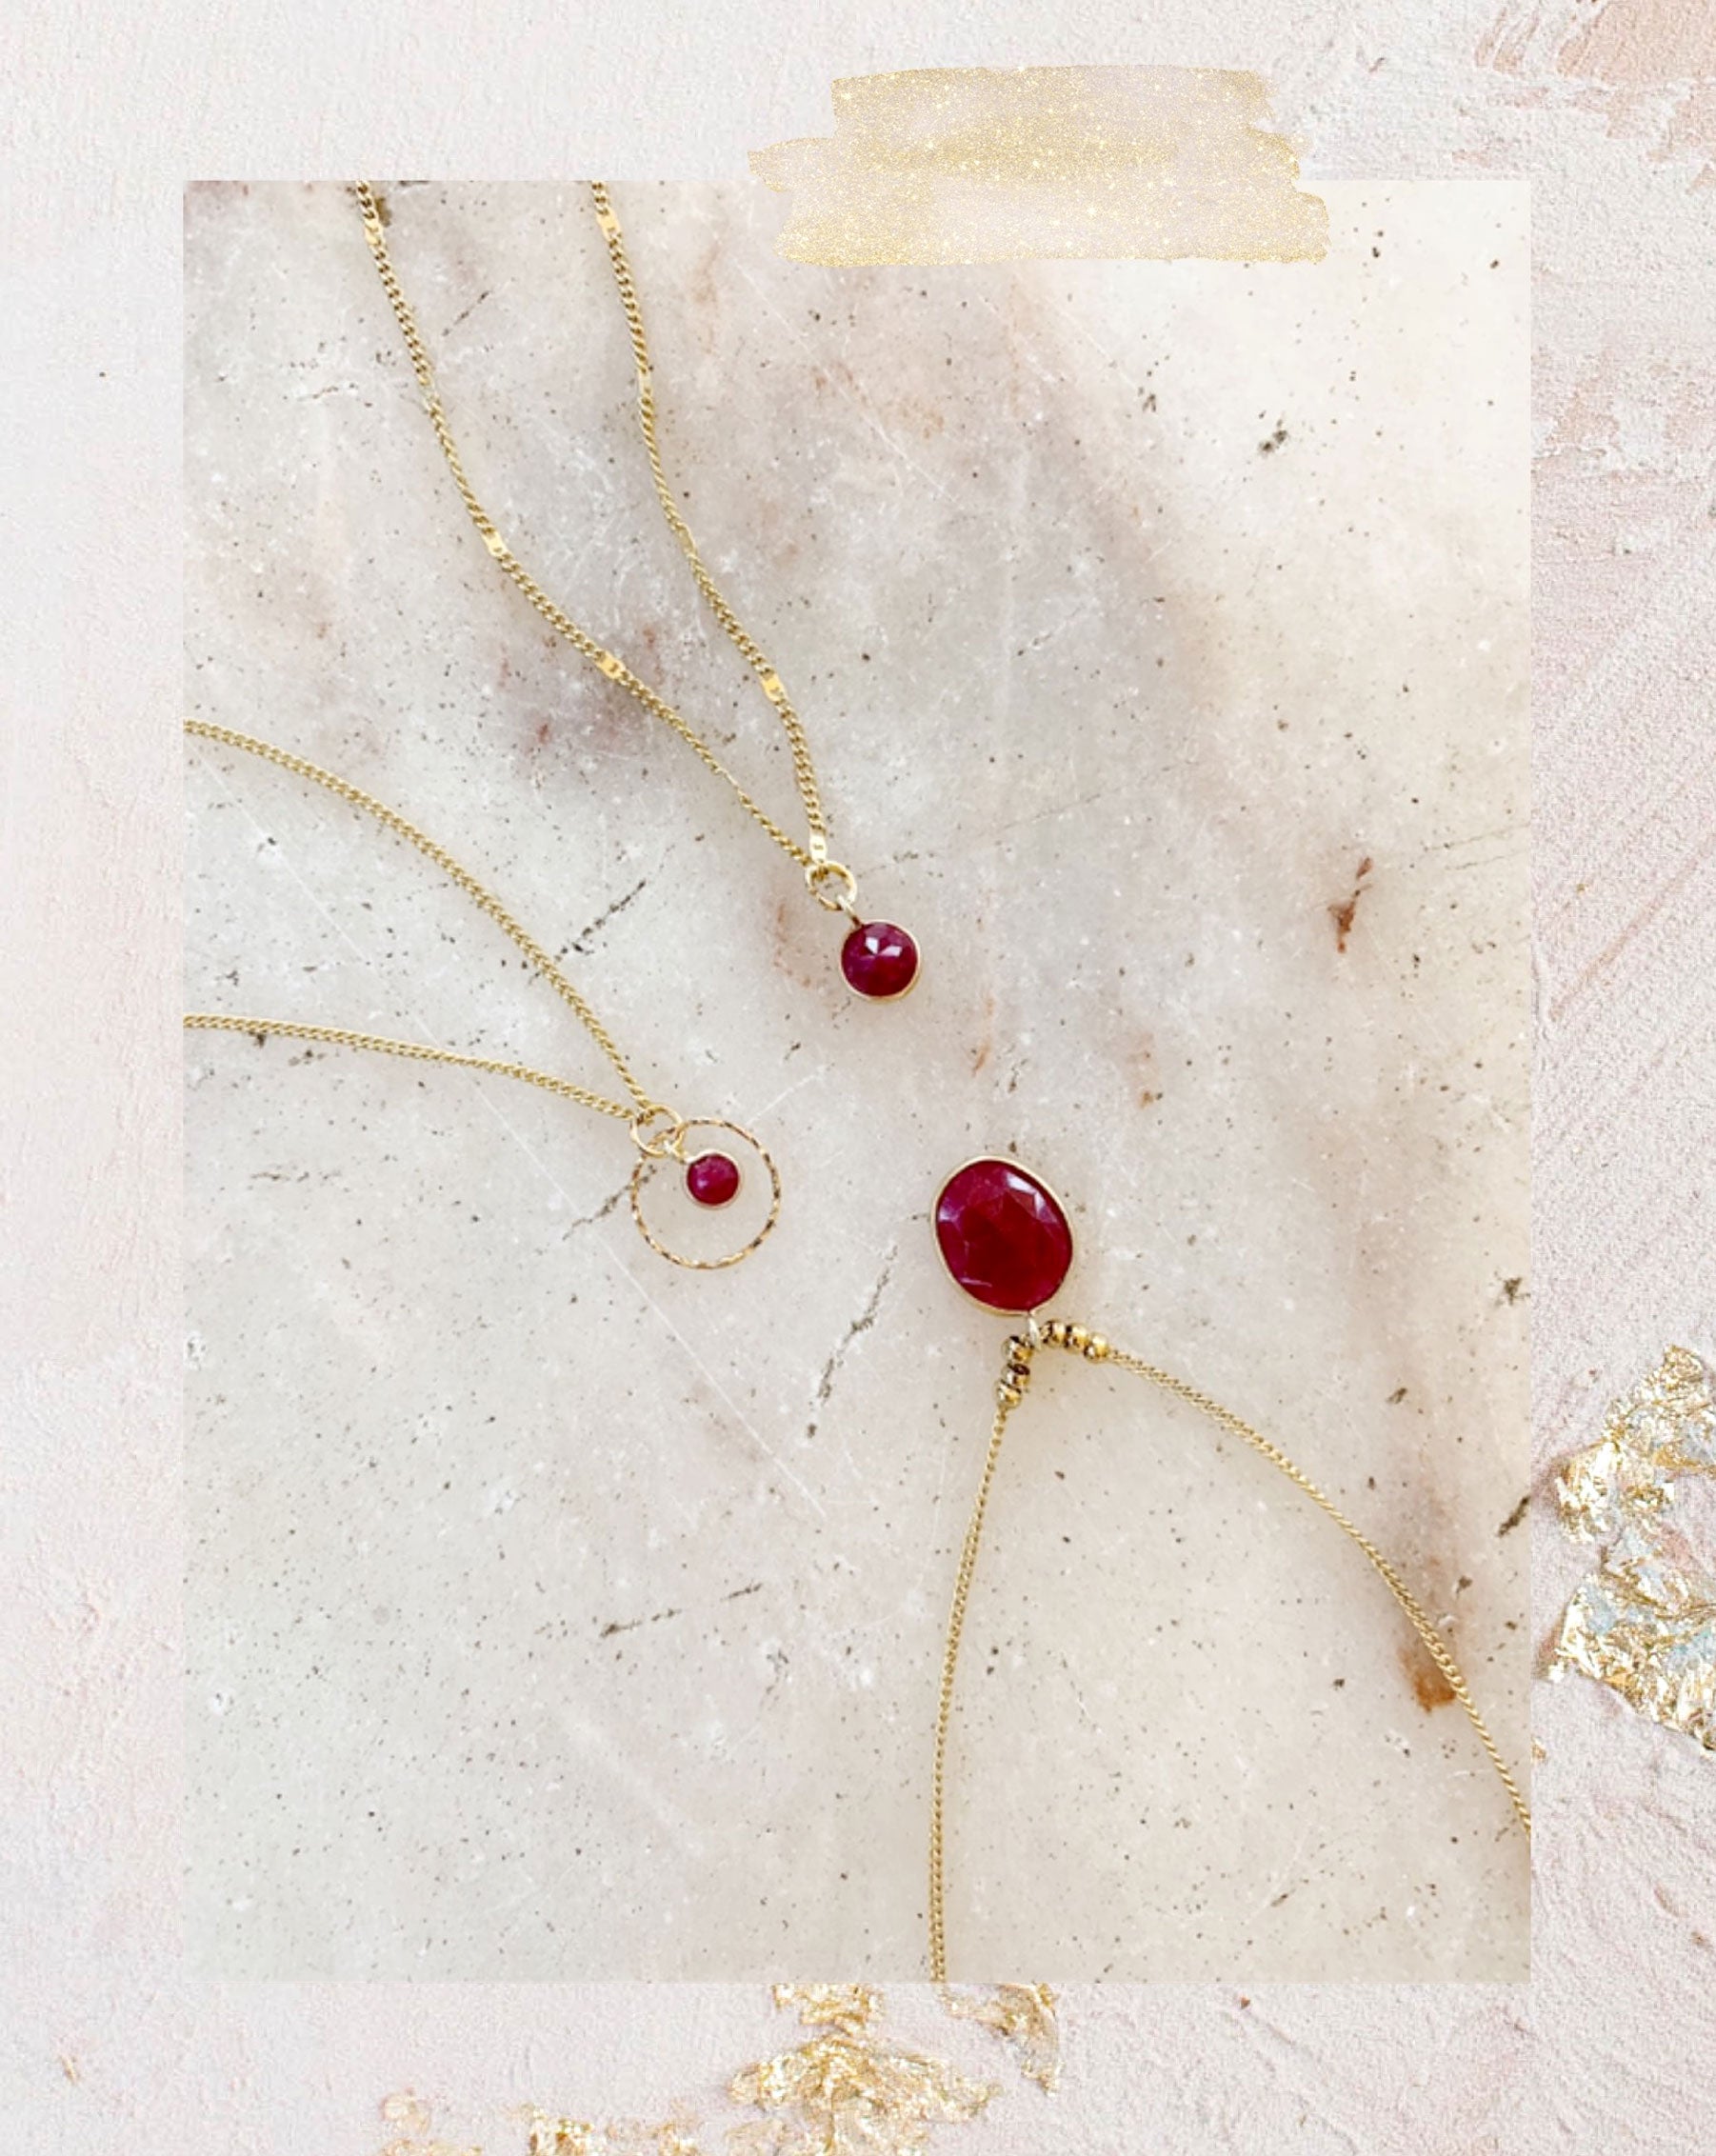 Stone & Beads Red Agate Necklace